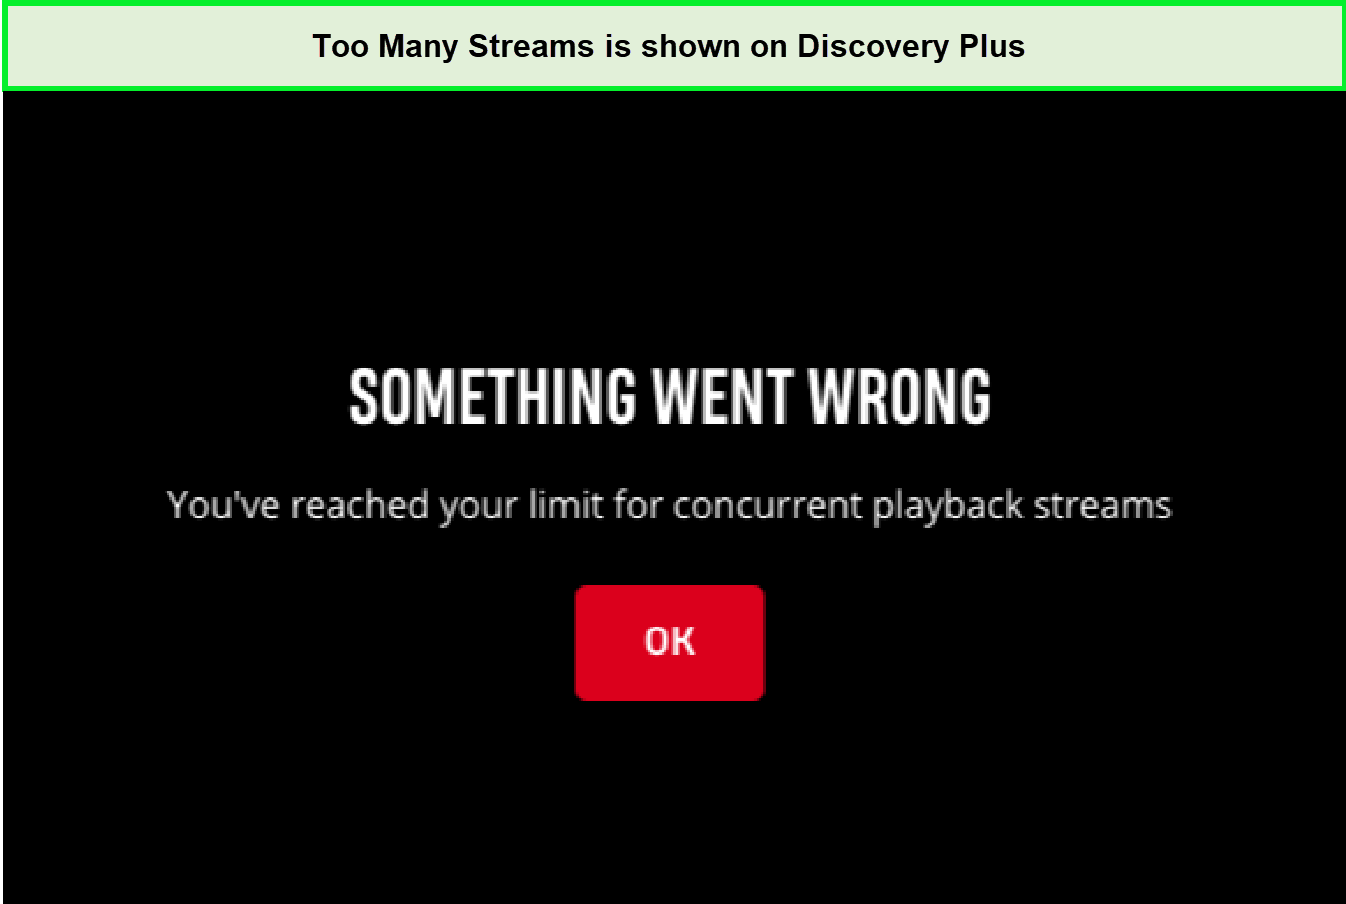 discovery-plus-too-many-streams-error-in-Germany